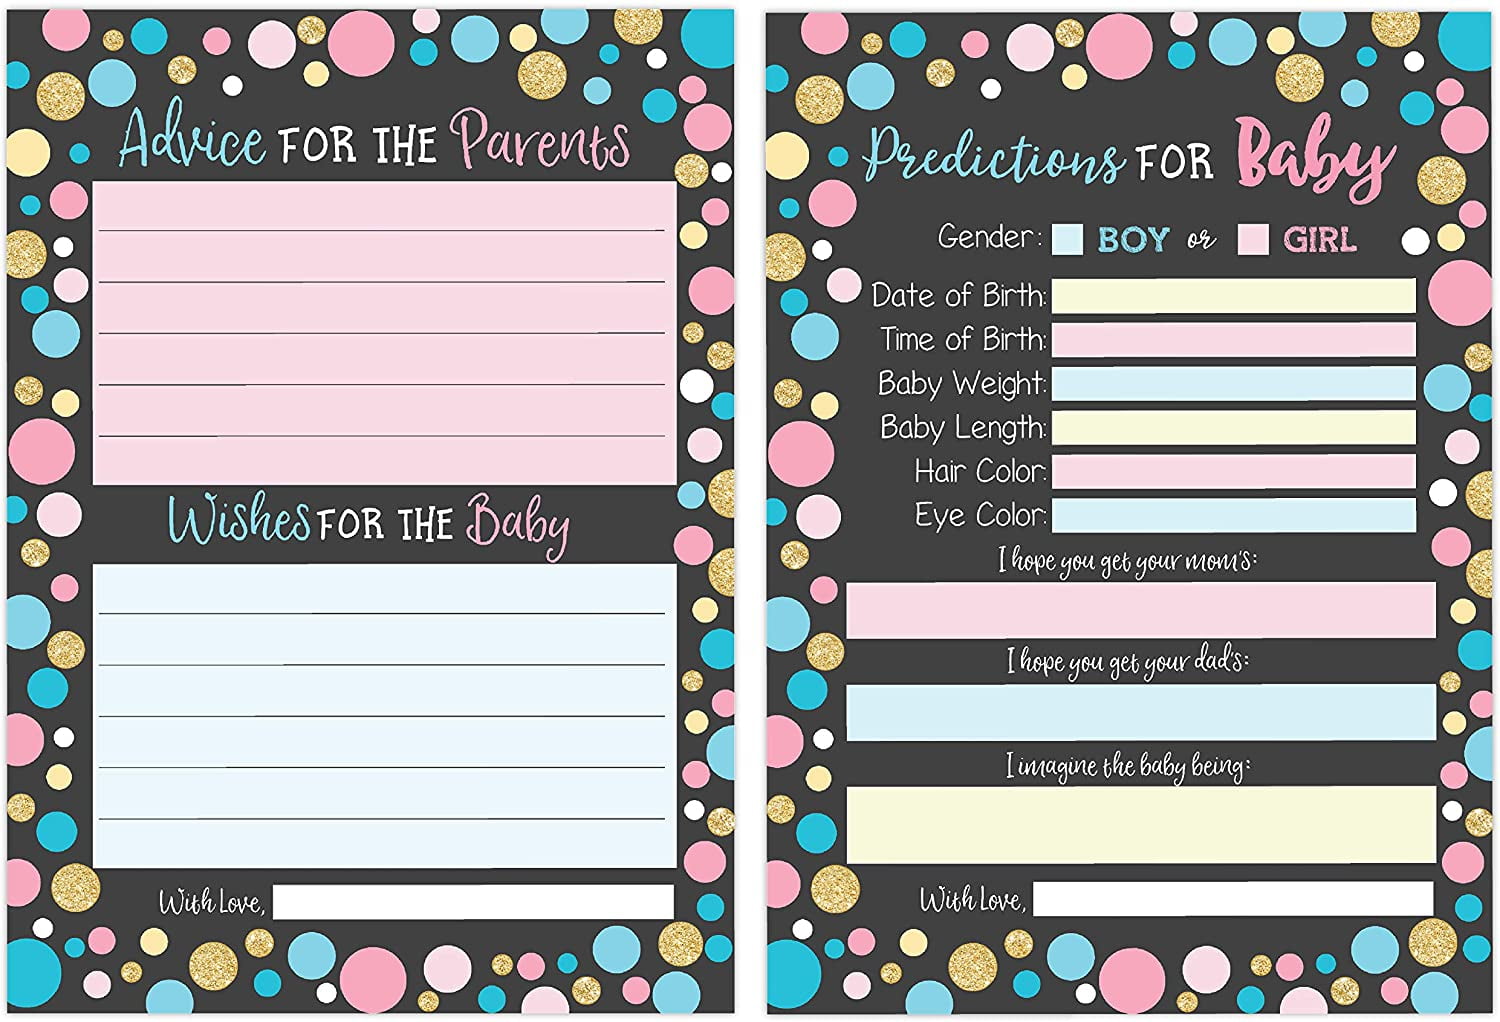 50 Pack with a Beautiful Keepsake Box Baby Shower/Gender Reveal Party Game for boy and Girls New - Sale Baby Shower Prediction Advice Cards Gender-Neutral Colour Scheme with Gold foil Designs